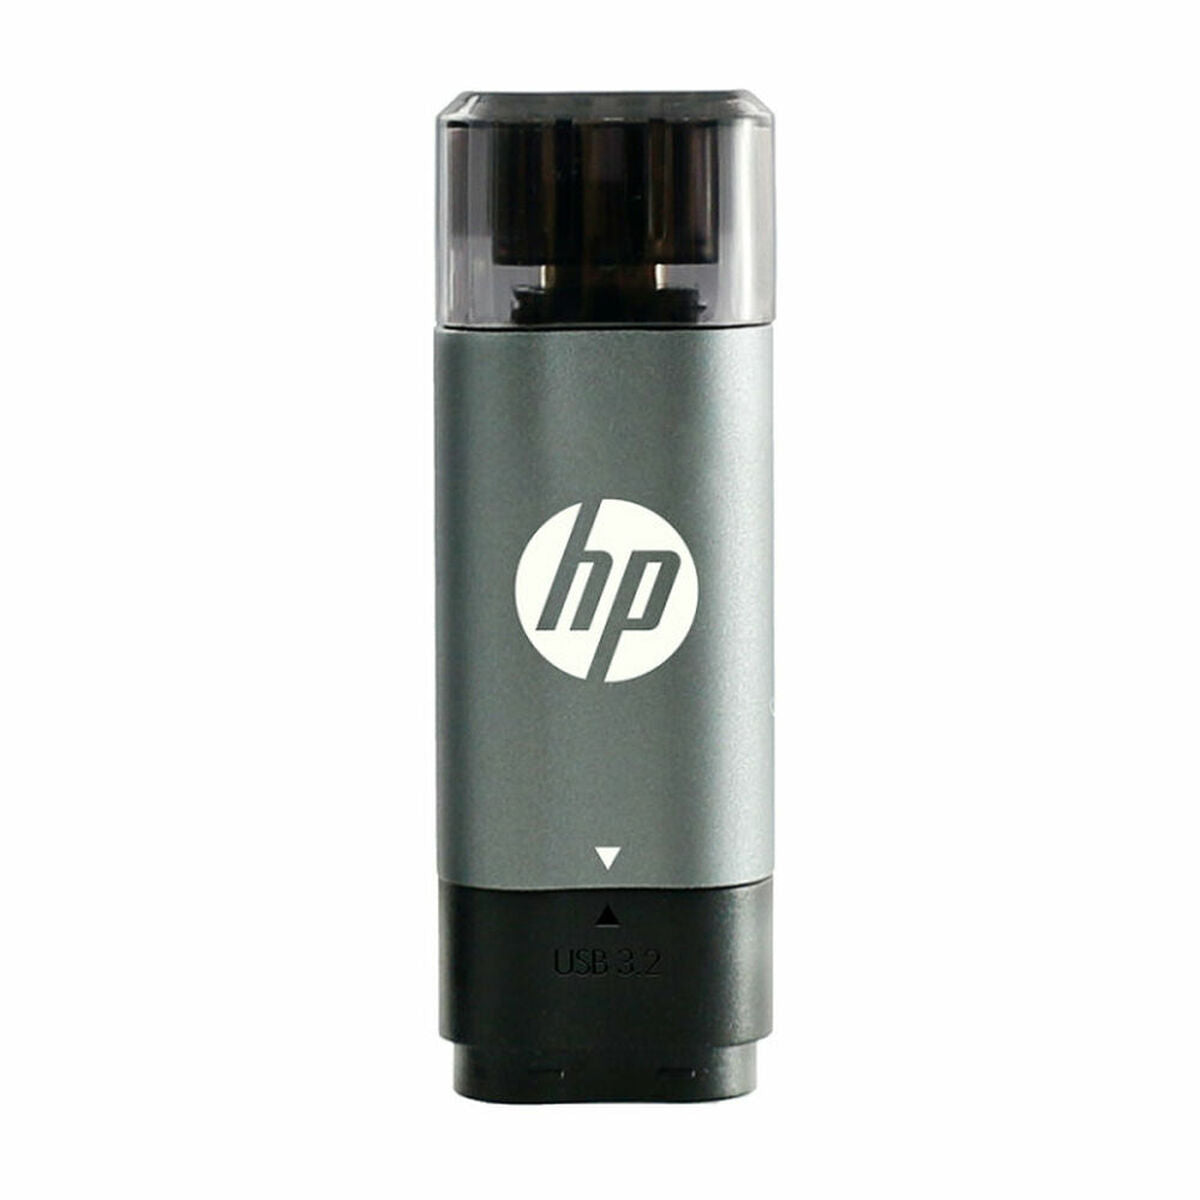 USB stick PNY HPFD5600C-256, PNY, Computing, Data storage, usb-stick-pny-hpfd5600c-256, Brand_PNY, category-reference-2609, category-reference-2803, category-reference-2817, category-reference-t-19685, category-reference-t-19909, category-reference-t-21355, computers / components, Condition_NEW, Price_50 - 100, Teleworking, RiotNook